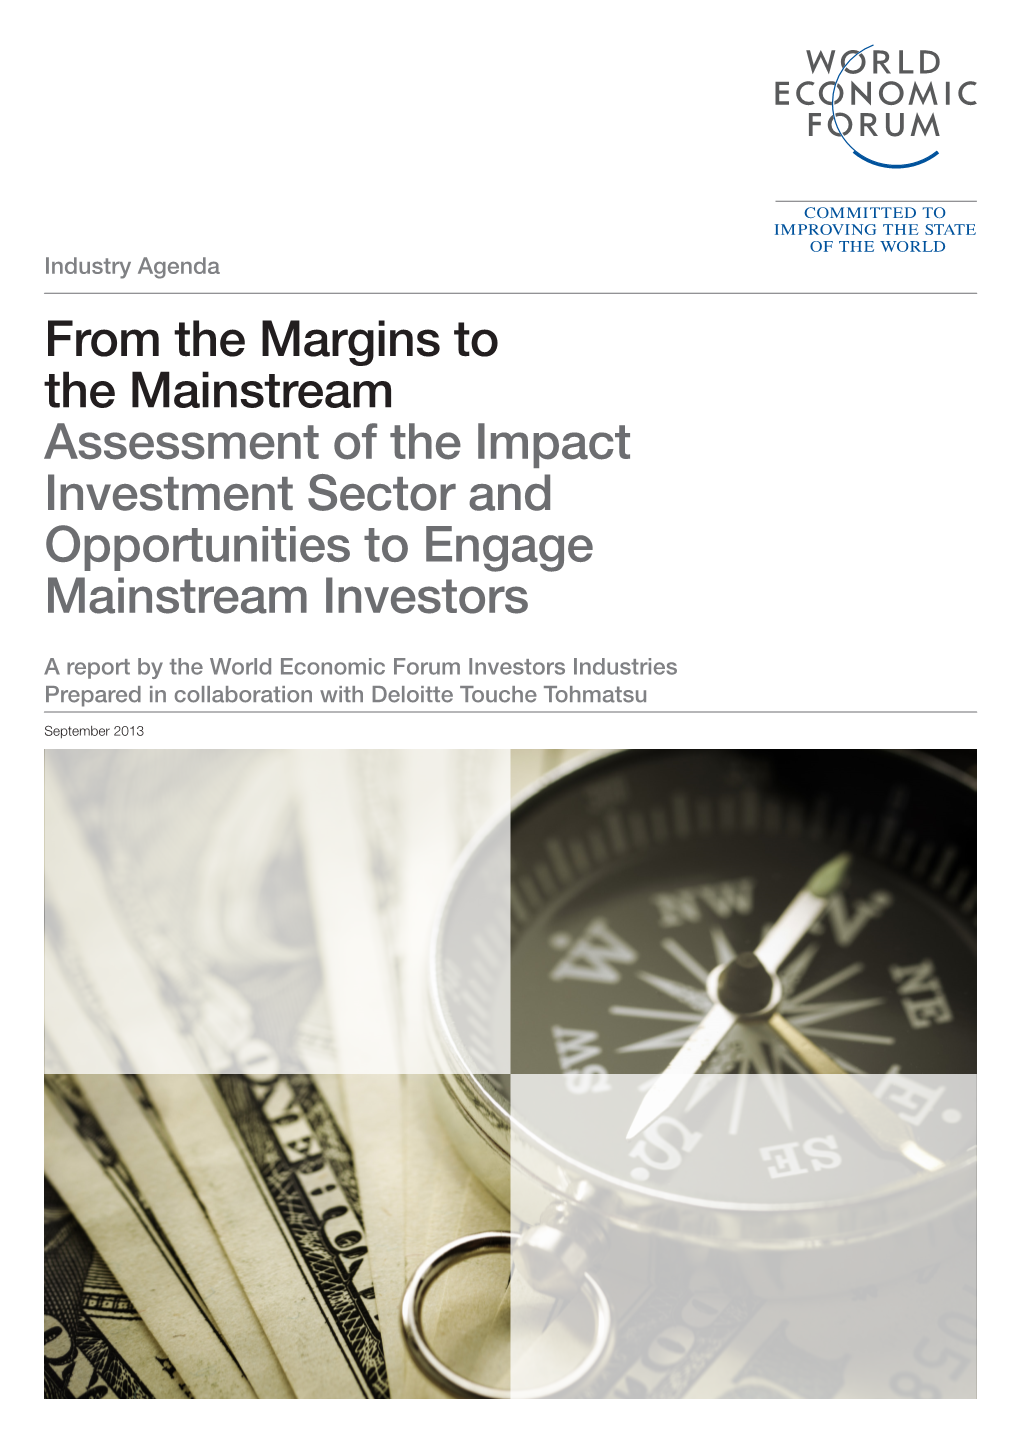 Assessment of the Impact Investment Sector and Opportunities to Engage Mainstream Investors